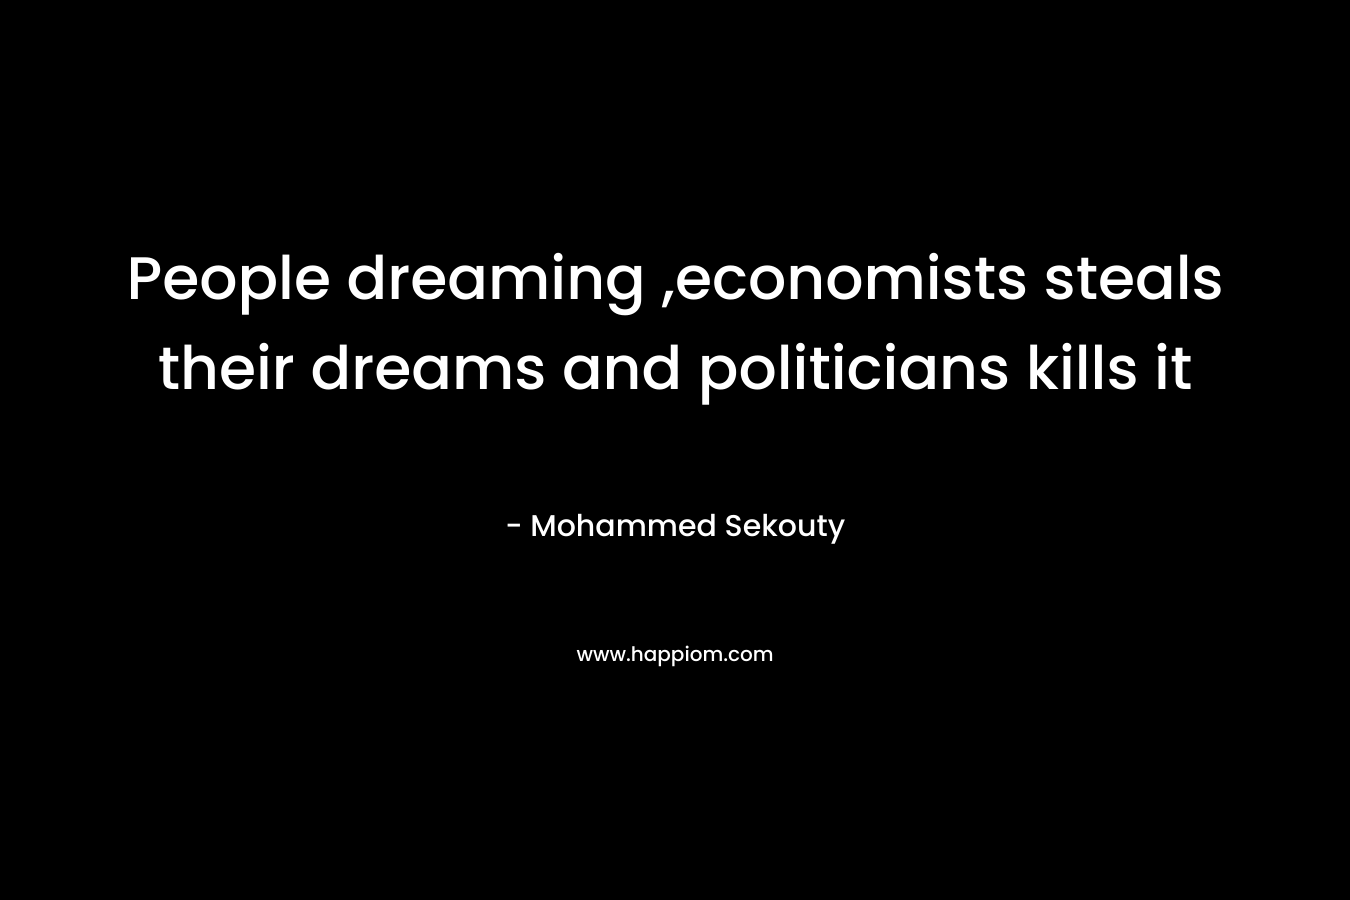 People dreaming ,economists steals their dreams and politicians kills it